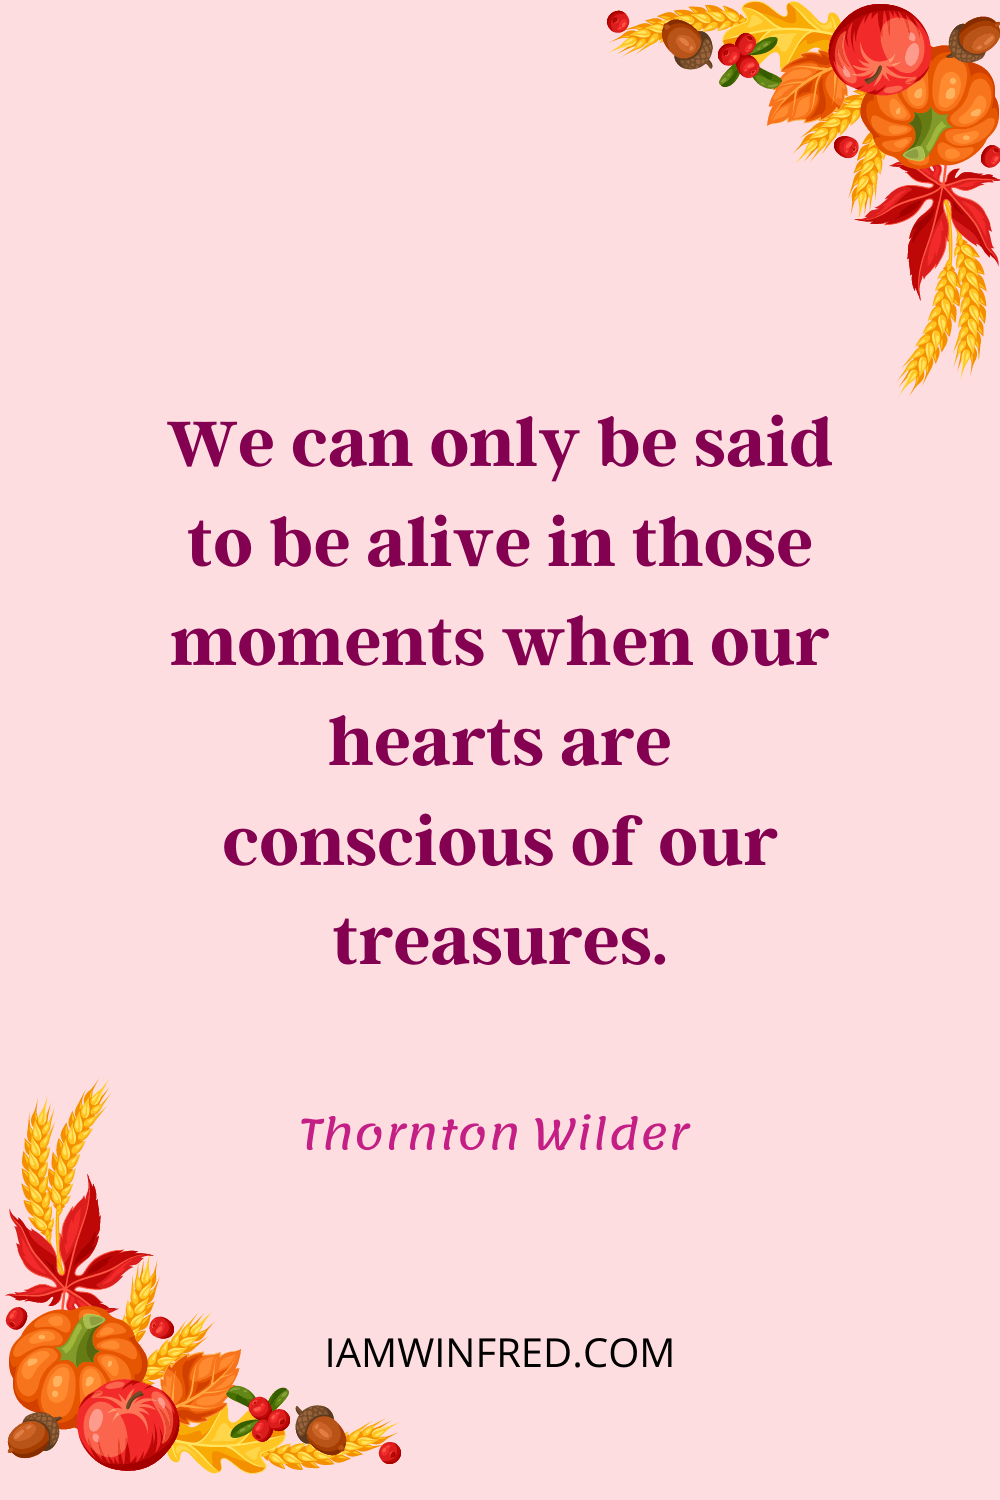 We Can Only Be Said To Be Alive In Those Moments When Our Hearts Are Conscious Of Our Treasures.